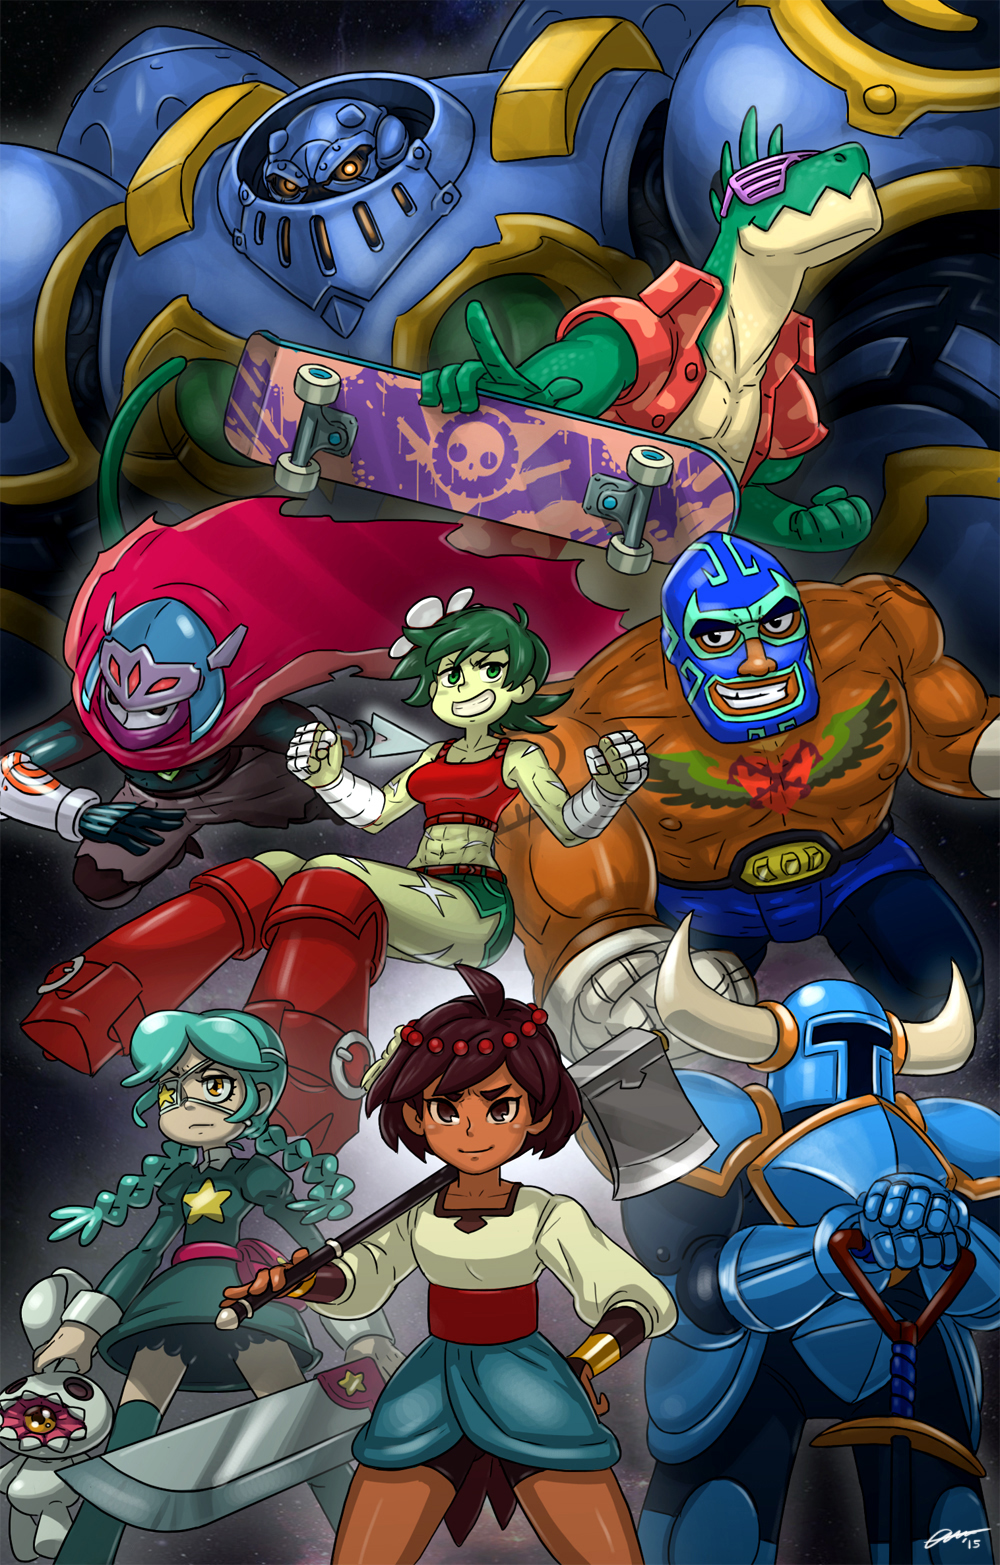 3girls 5boys ajna_(indivisible) alpha_gamboa annie_(skullgirls) armor axe battle_chasers beads belt belt_pouch bike_shorts black_eyes blouse boots bracelet braid bridal_gauntlets brown_hair calibretto cape commentary curses'n'chaos dark_skin dated dinosaur dinosaur_boy dress eyepatch flower full_armor green_dress green_eyes green_hair green_skin grin guacamelee! hair_flower hair_ornament hand_on_hip helmet highres holding horned_helmet hyper_light_drifter indivisible jacket jewelry juan_(guacamelee) knee_boots lea_(curses'n'chaos) long_sleeves looking_at_viewer monster_boy multiple_boys multiple_girls sash scar short_hair short_shorts shorts shorts_under_skirt shovel shovel_knight shovel_knight_(character) signature skateboard skirt skullgirls smile standing star stuffed_animal stuffed_bunny stuffed_toy sunglasses super_time_force_ultra the_drifter thigh-highs thigh_boots twin_braids tyrannosaurus_rex weapon worktool wrestling_mask wrestling_outfit yellow_eyes zackasaurus